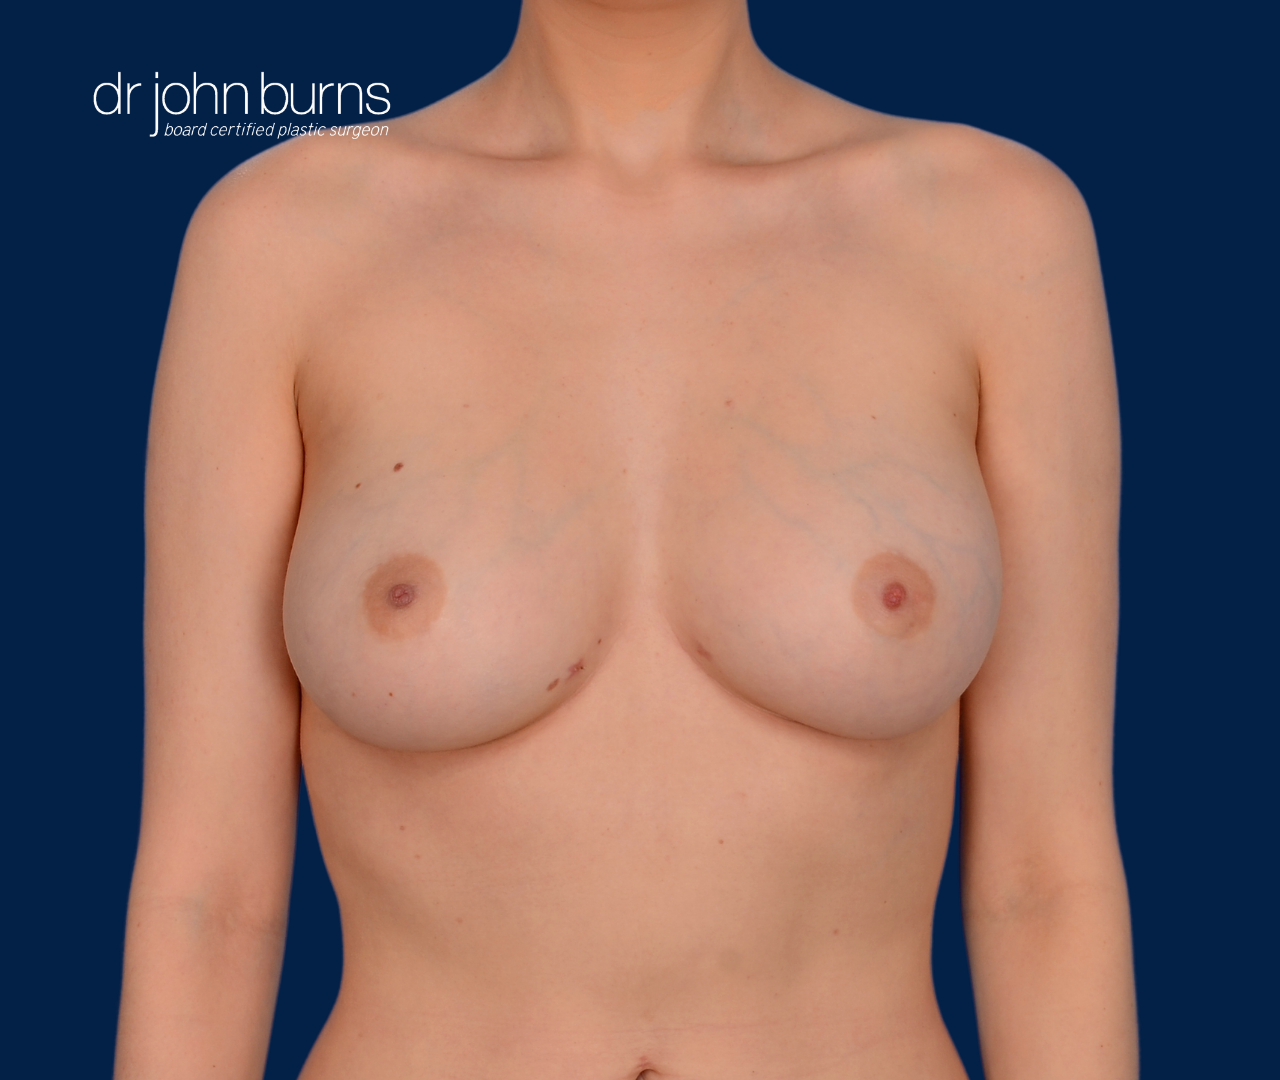 case 13- after fat transfer to breast by top plastic surgeon, Dr. John Burns